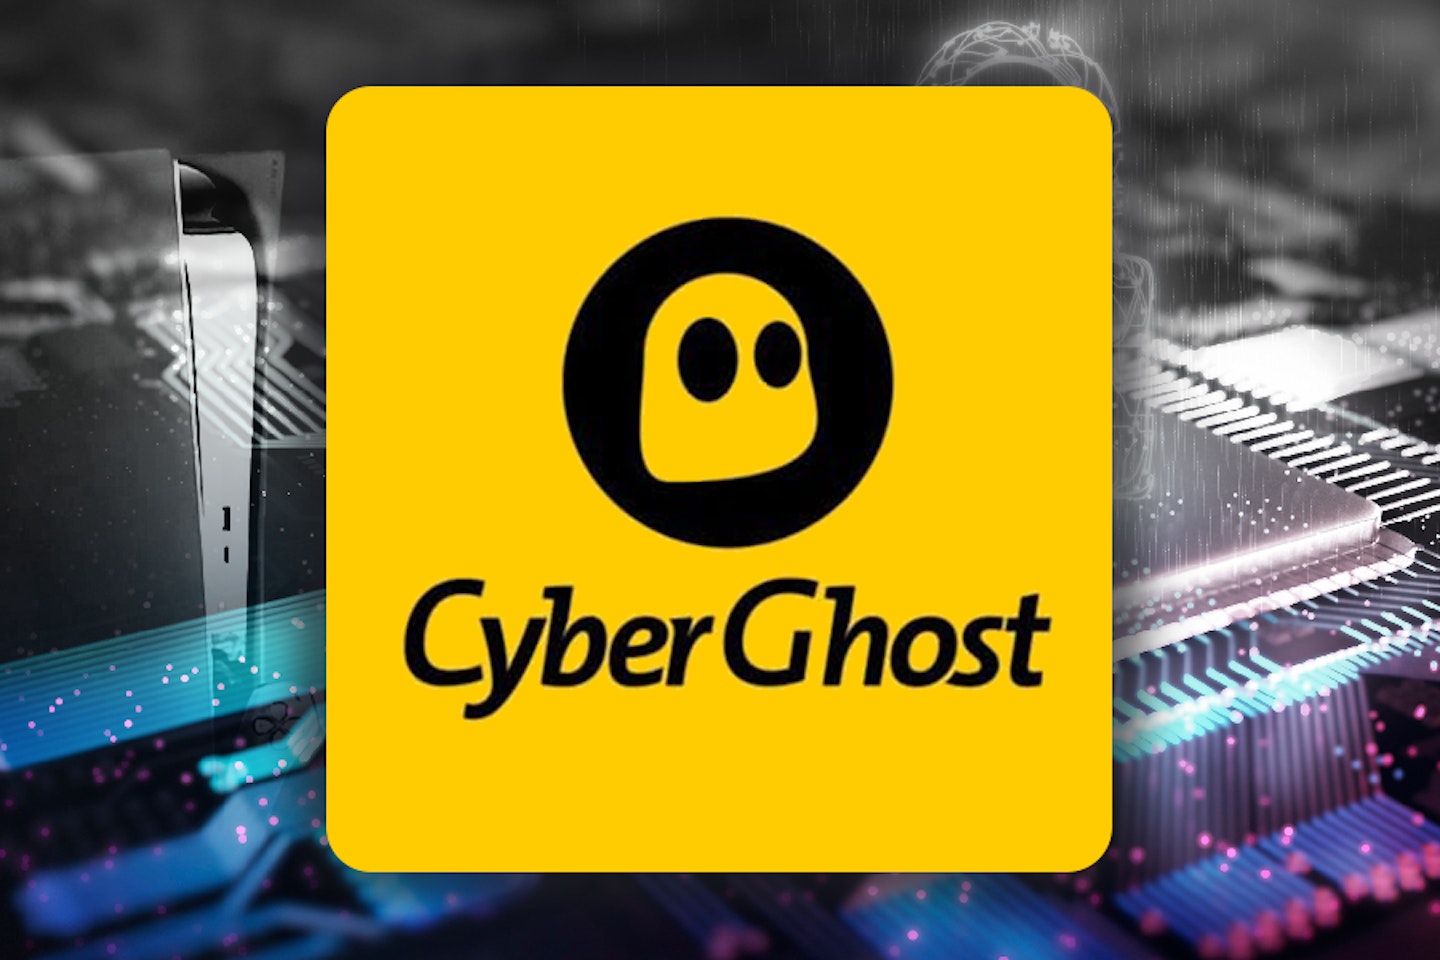 CyberGhost - possibly the best PS5 VPN